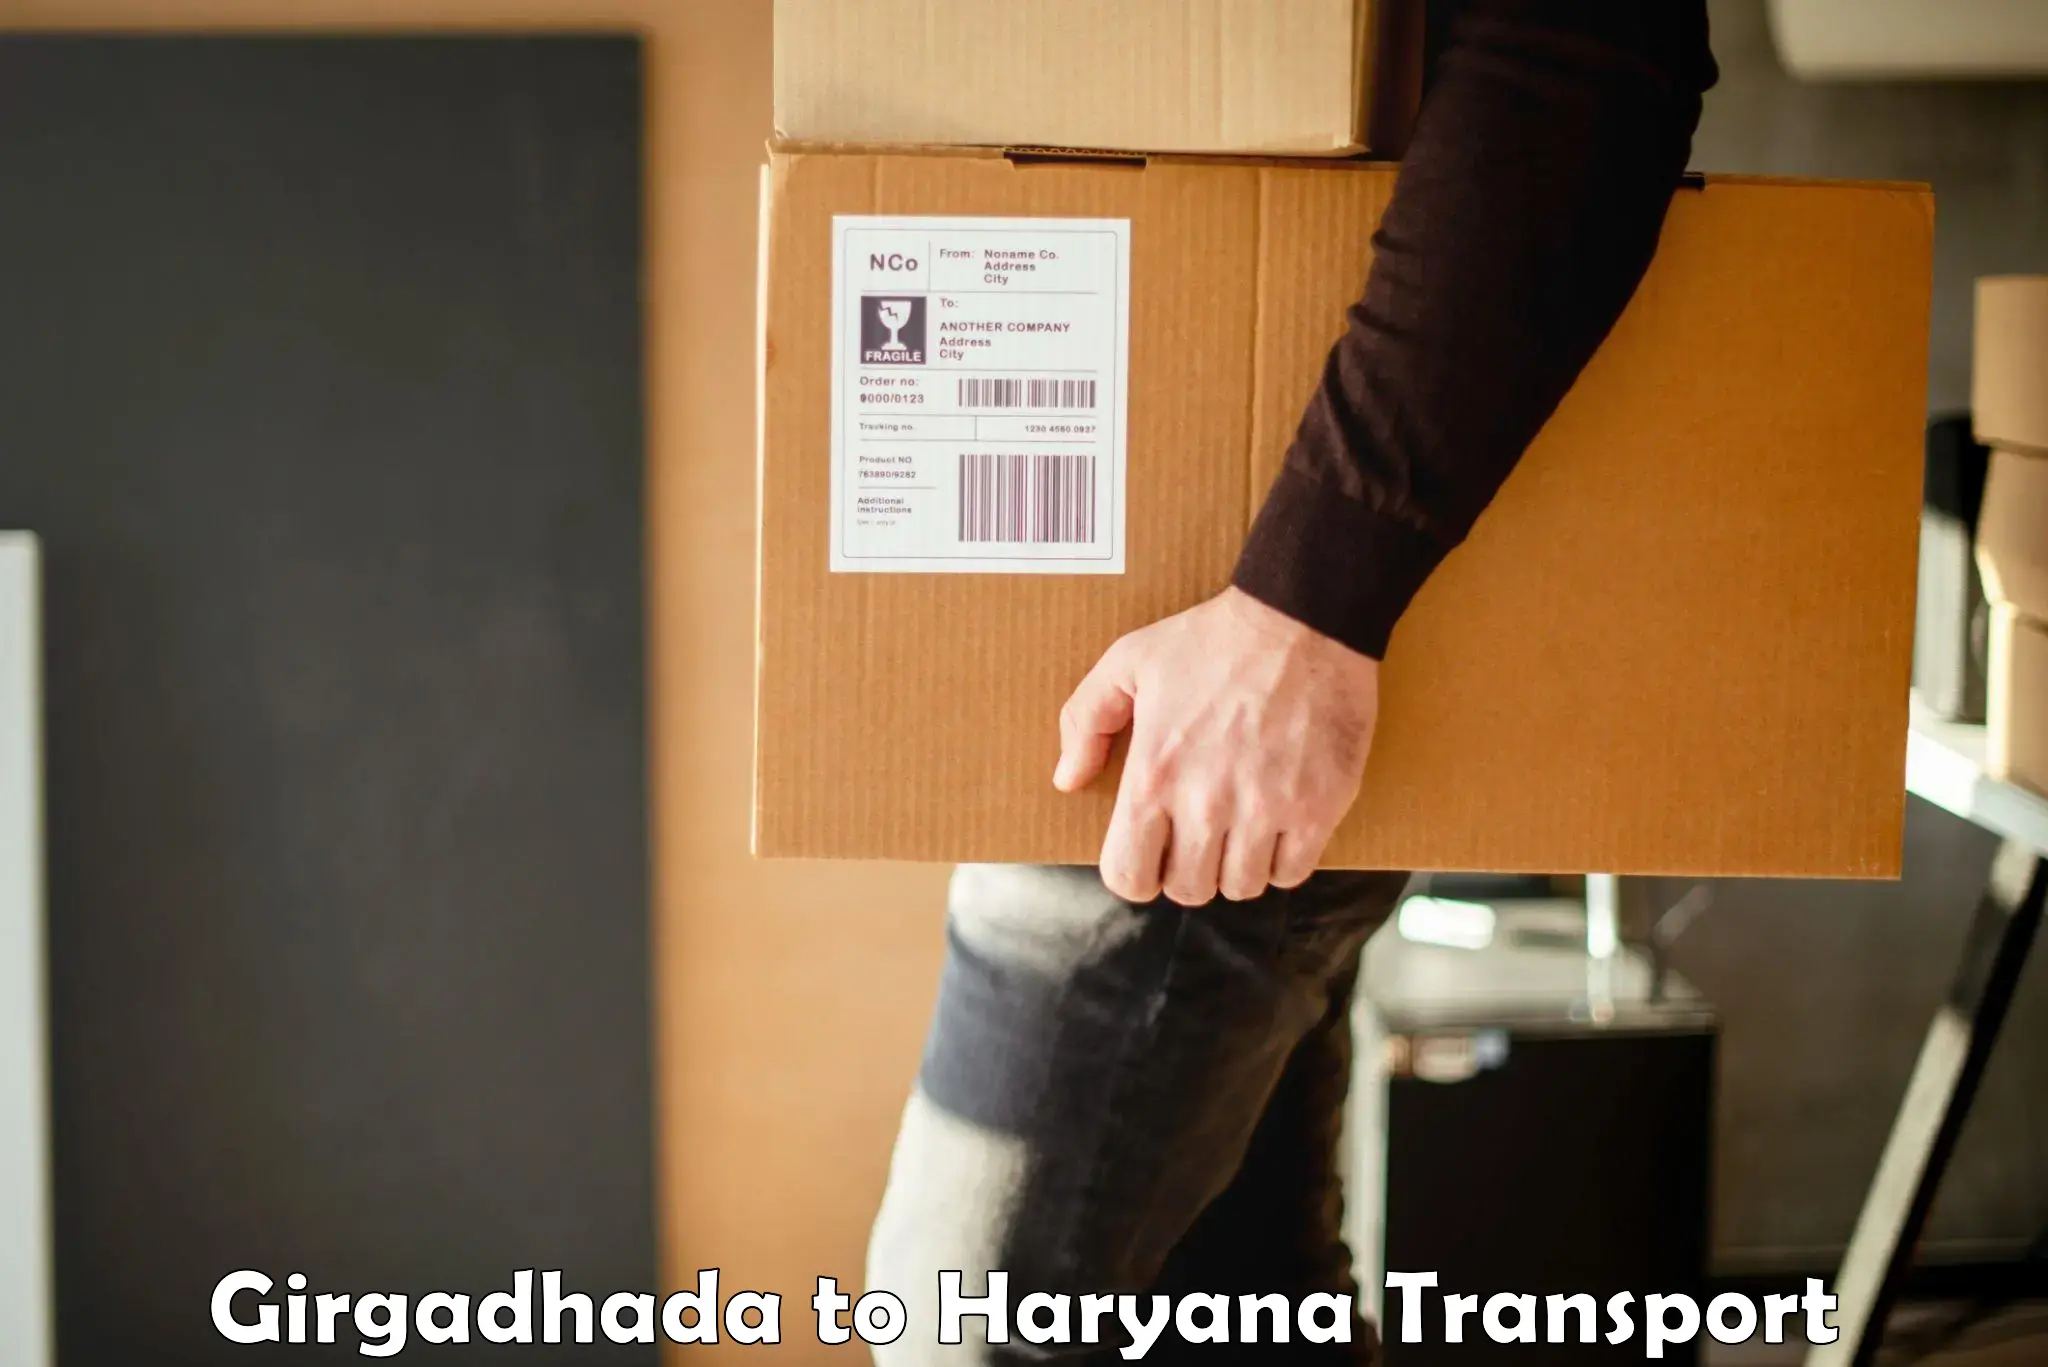 Express transport services in Girgadhada to Ellenabad